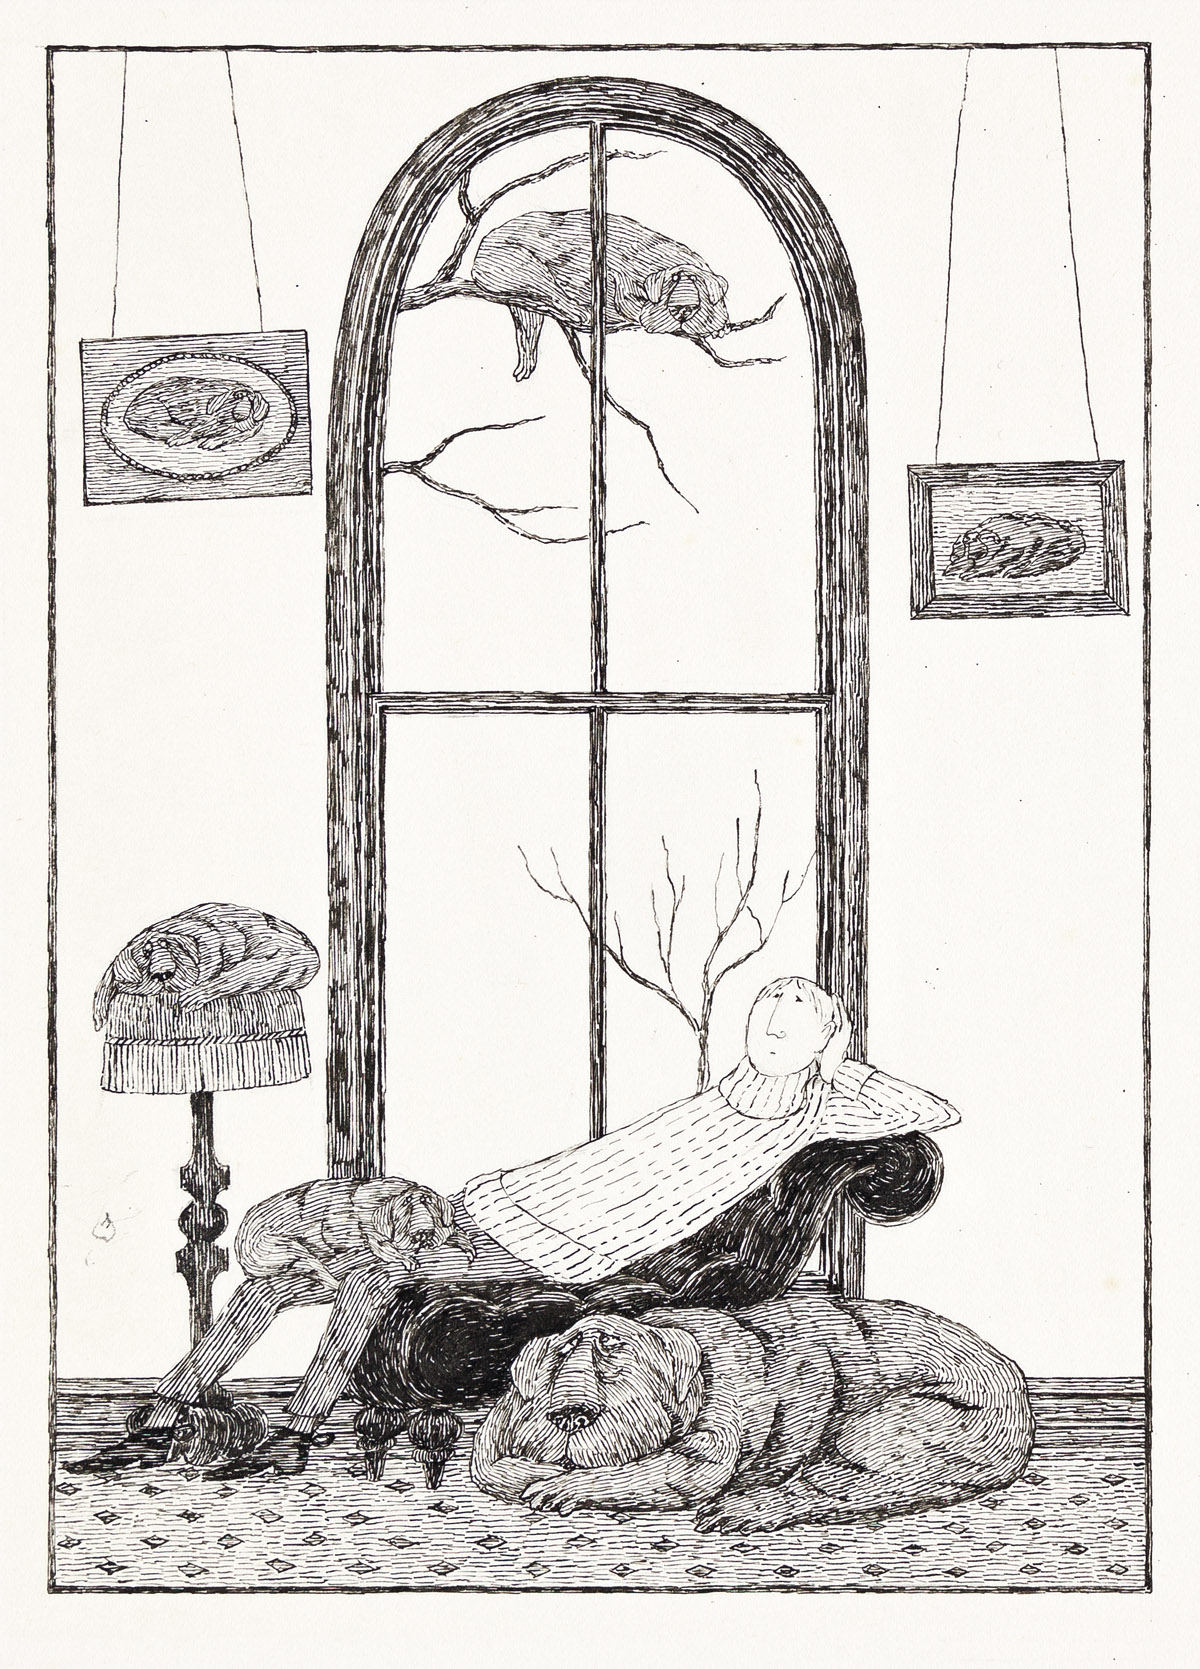 EDWARD GOREY (1925-2000) Untitled / Man lounging with hounds on a dreary day.